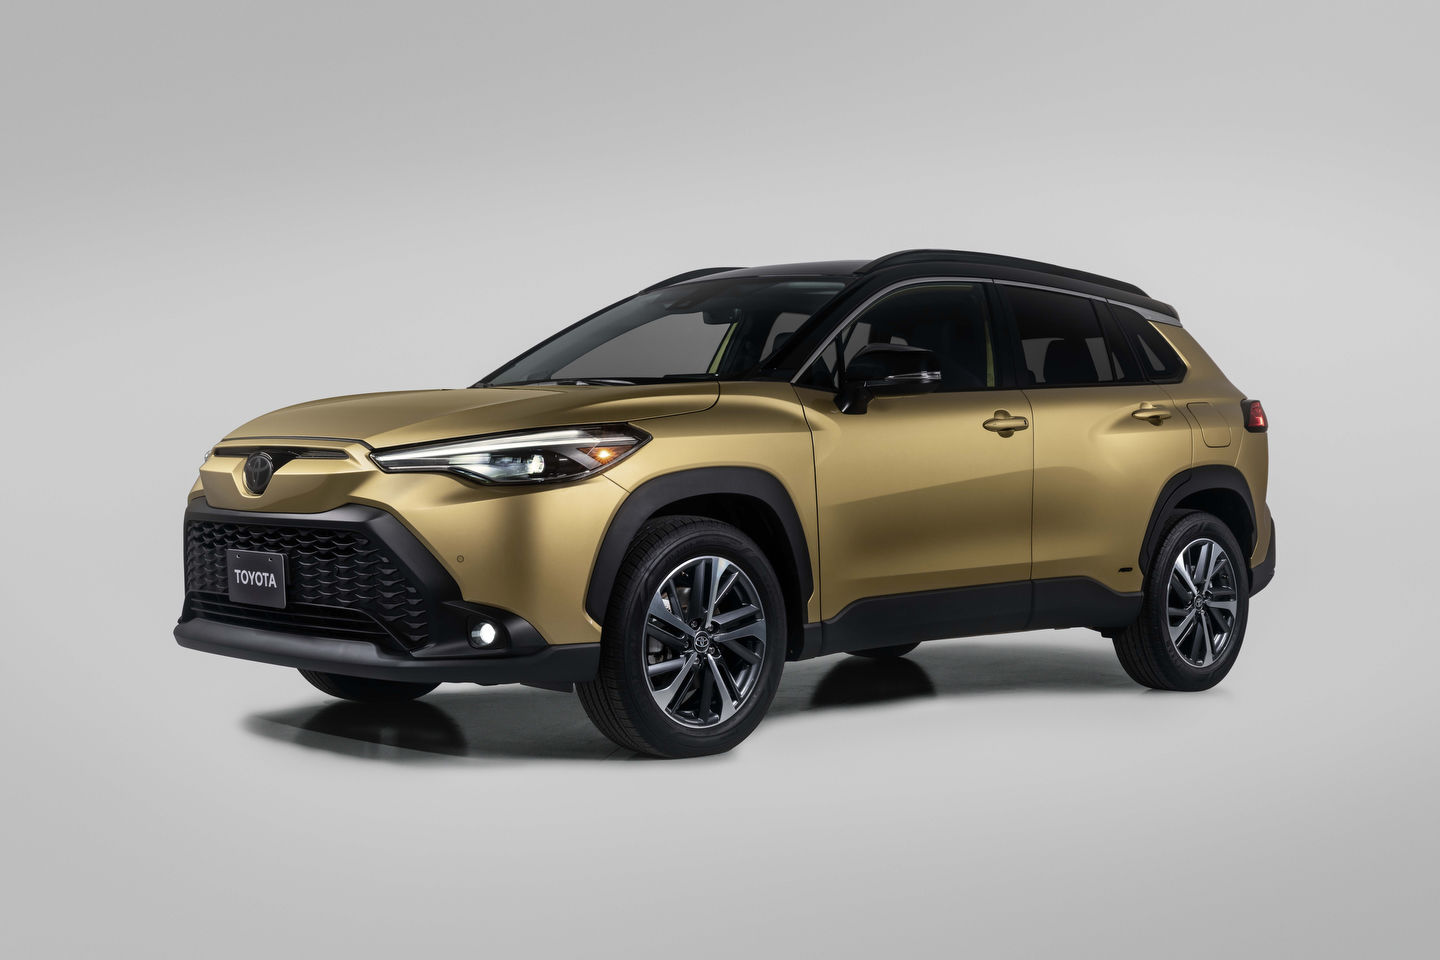 Toyota Corolla adds the Cross small SUV to legendary car's lineup